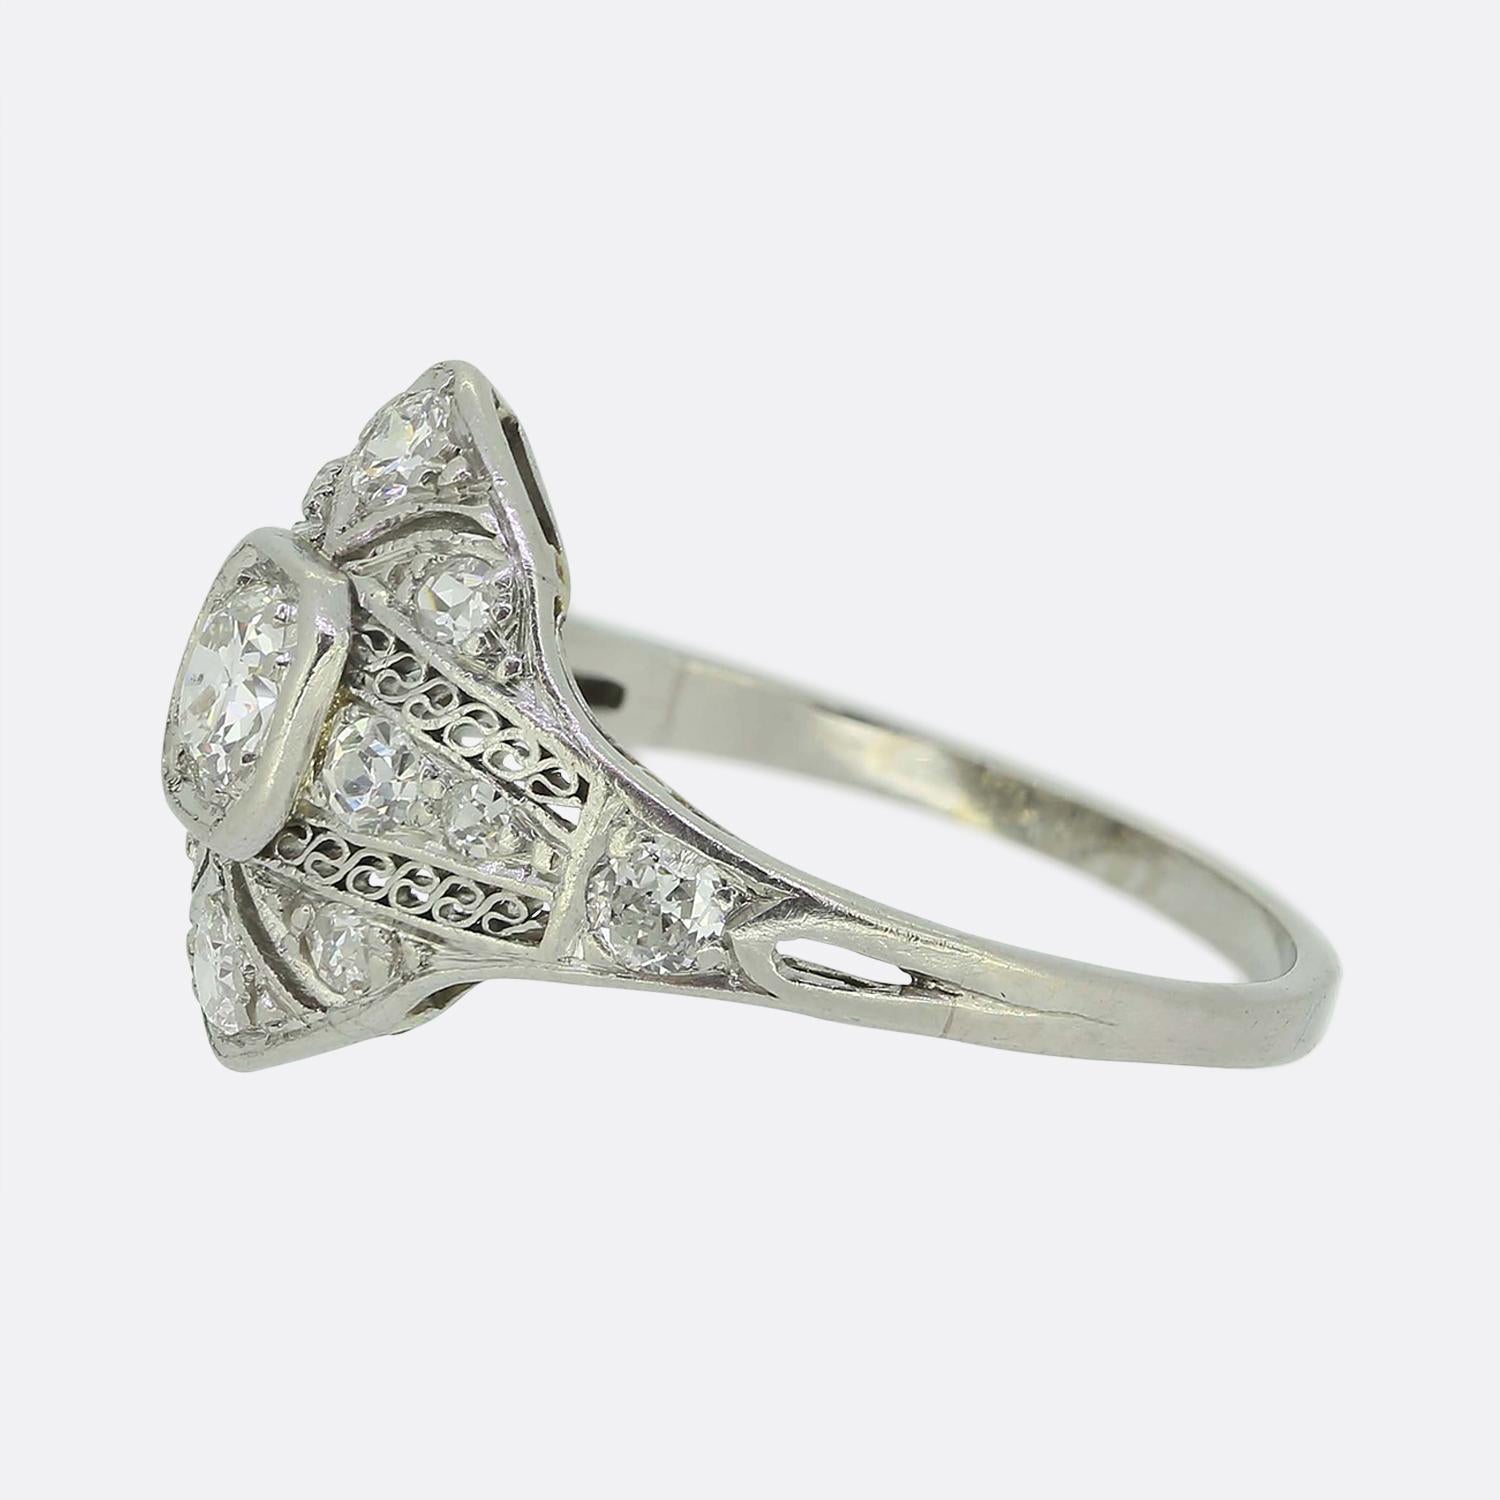 Here we have a fabulous diamond ring crafted at a time when the Art Deco style was at the height of world design. This piece features a single claw set old European cut diamond at the centre of the face in a clean octagonally shaped bordering. This